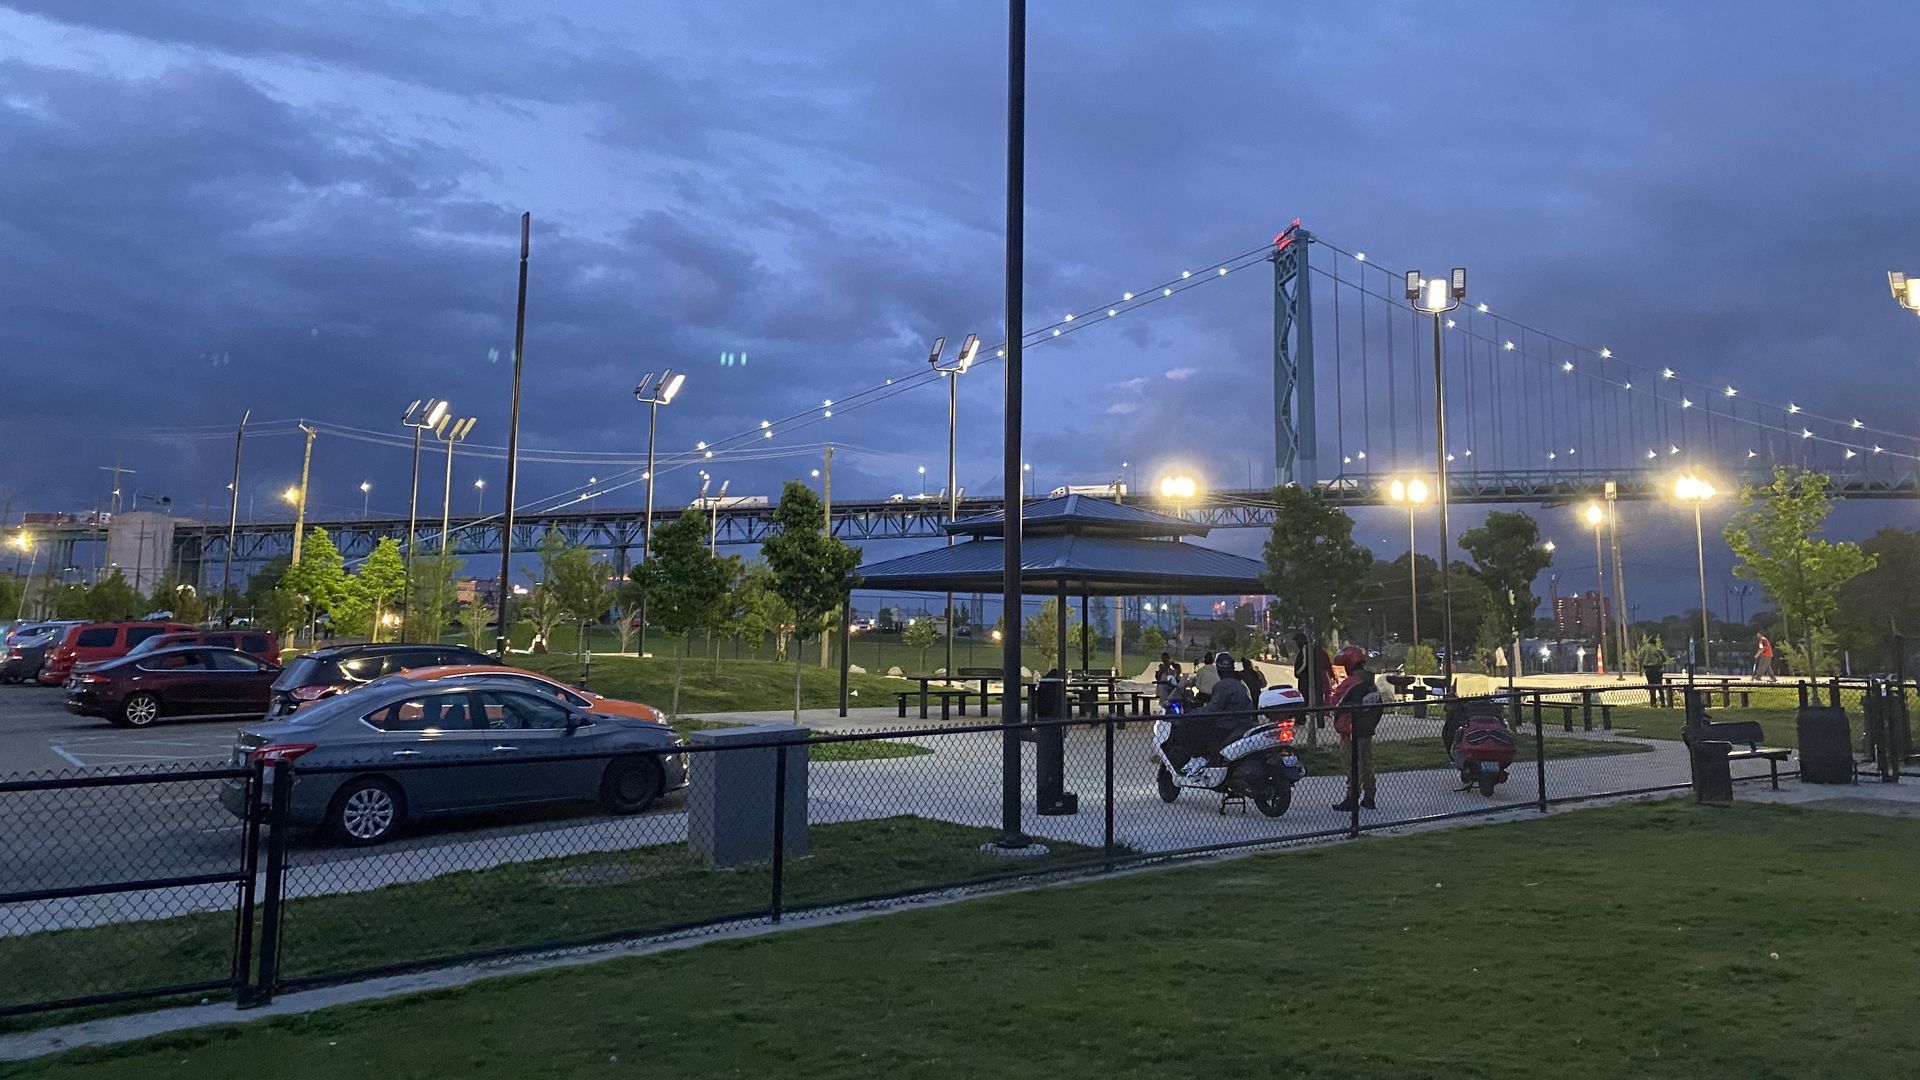 People hang out at a skate park at night, with the Ambassador Bridge visible in the background.